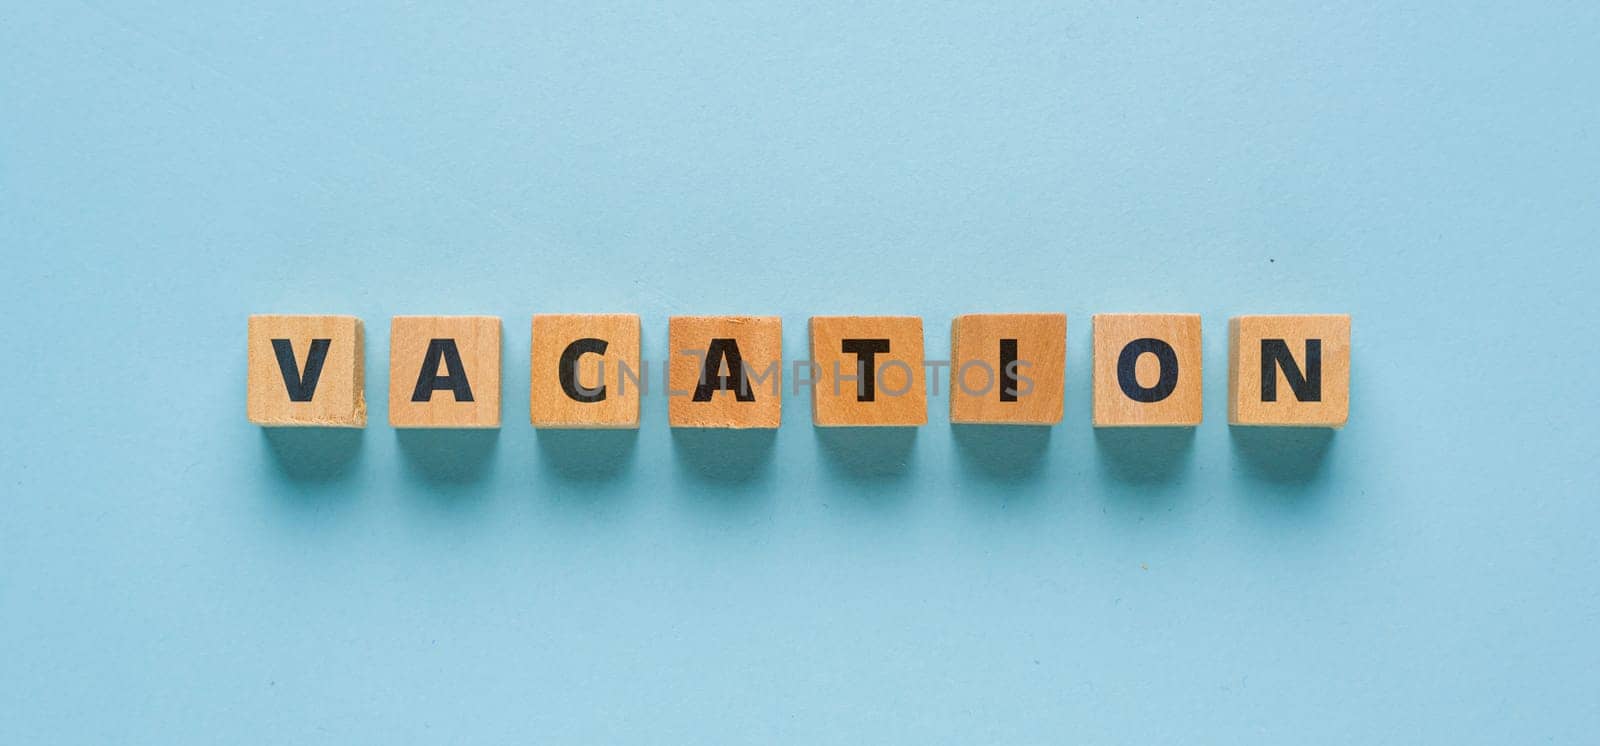 Vacation is written on wooden cubes on a blue background